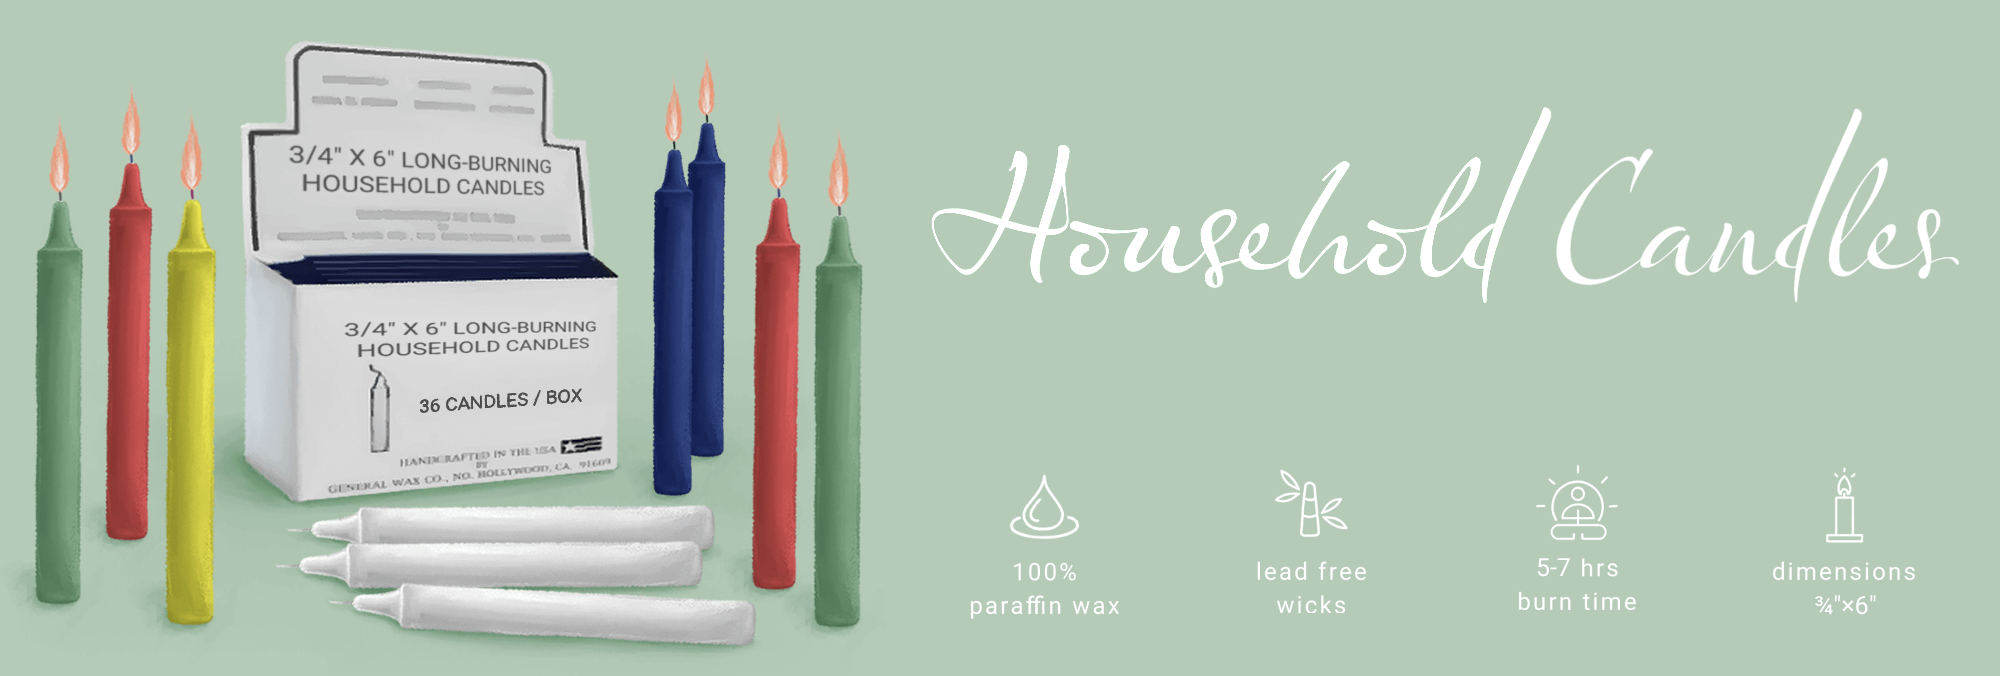 Household Candles 6"